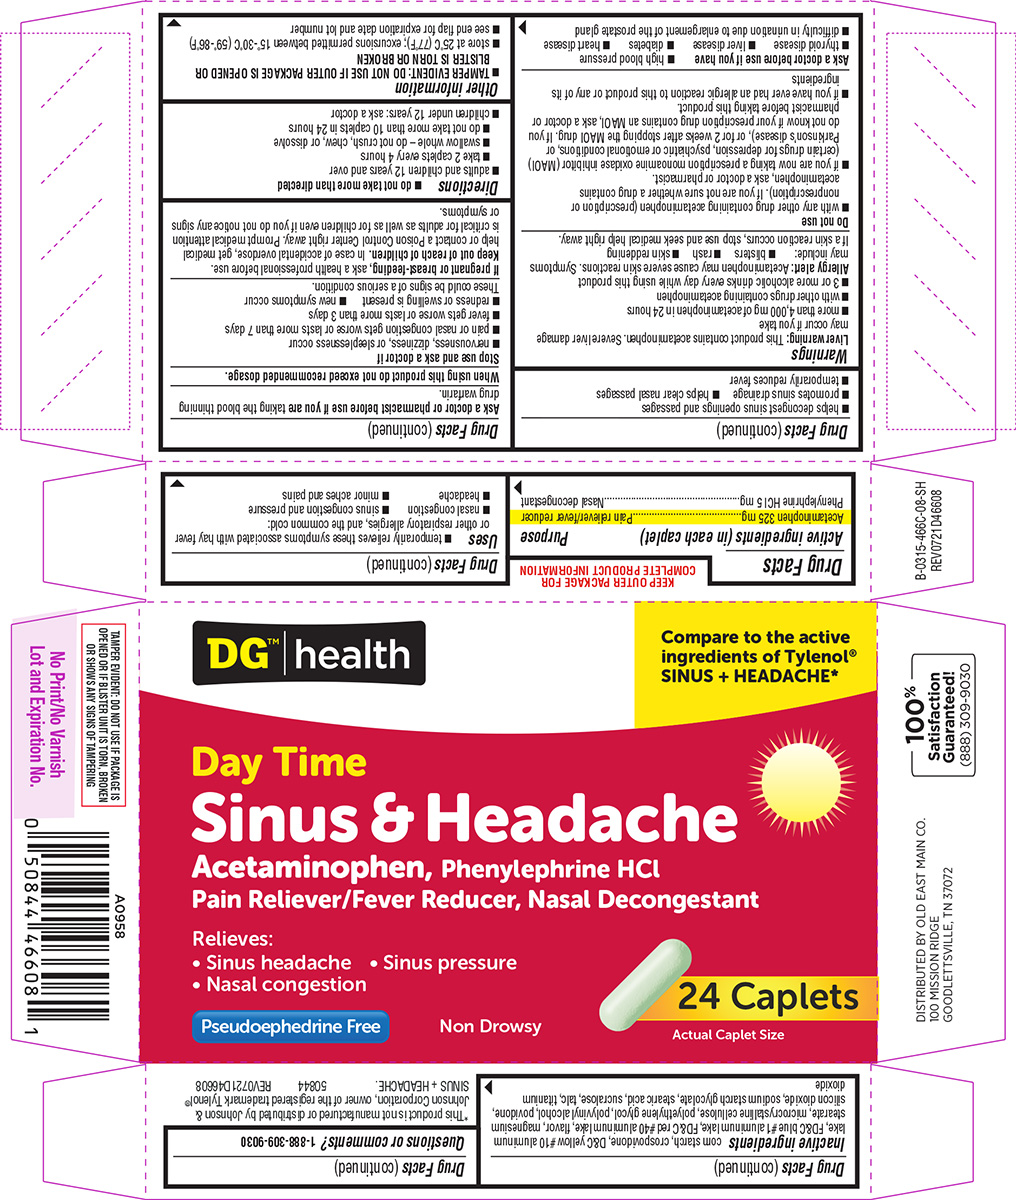 Sinus And Headache Daytime | Acetaminophen, Phenylephrine Hcl Tablet while Breastfeeding